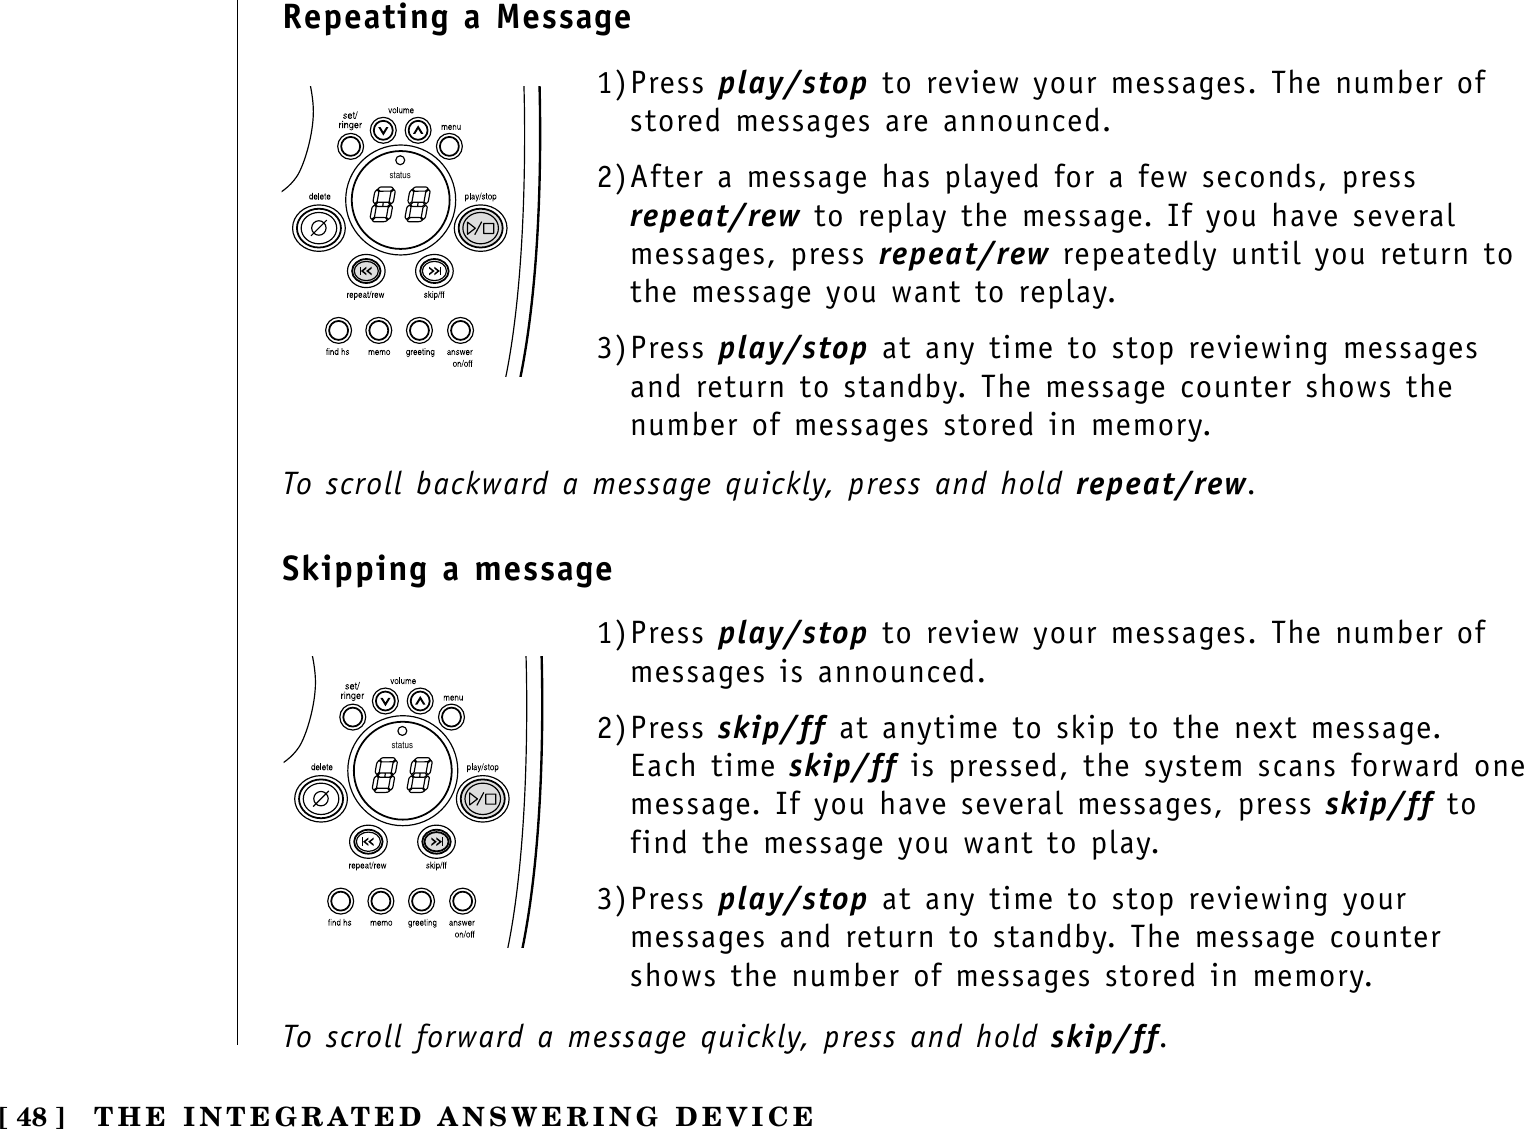 [ 48 ] THE INTEGRATED ANSWERING DEVICE1)Press play/stop to review your messages. The number ofstored messages are announced.2)After a message has played for a few seconds, pressrepeat/rew to replay the message. If you have severalmessages, press repeat/rew repeatedly until you return tothe message you want to replay.3)Press play/stop at any time to stop reviewing messagesand return to standby. The message counter shows thenumber of messages stored in memory. statusstatus1)Press play/stop to review your messages. The number ofmessages is announced.2)Press skip/ff at anytime to skip to the next message.Each time skip/ff is pressed, the system scans forward onemessage. If you have several messages, press skip/ff tofind the message you want to play.3)Press play/stop at any time to stop reviewing yourmessages and return to standby. The message countershows the number of messages stored in memory. Repeating a MessageSkipping a messageTo scroll backward a message quickly, press and hold repeat/rew.To scroll forward a message quickly, press and hold skip/ff.